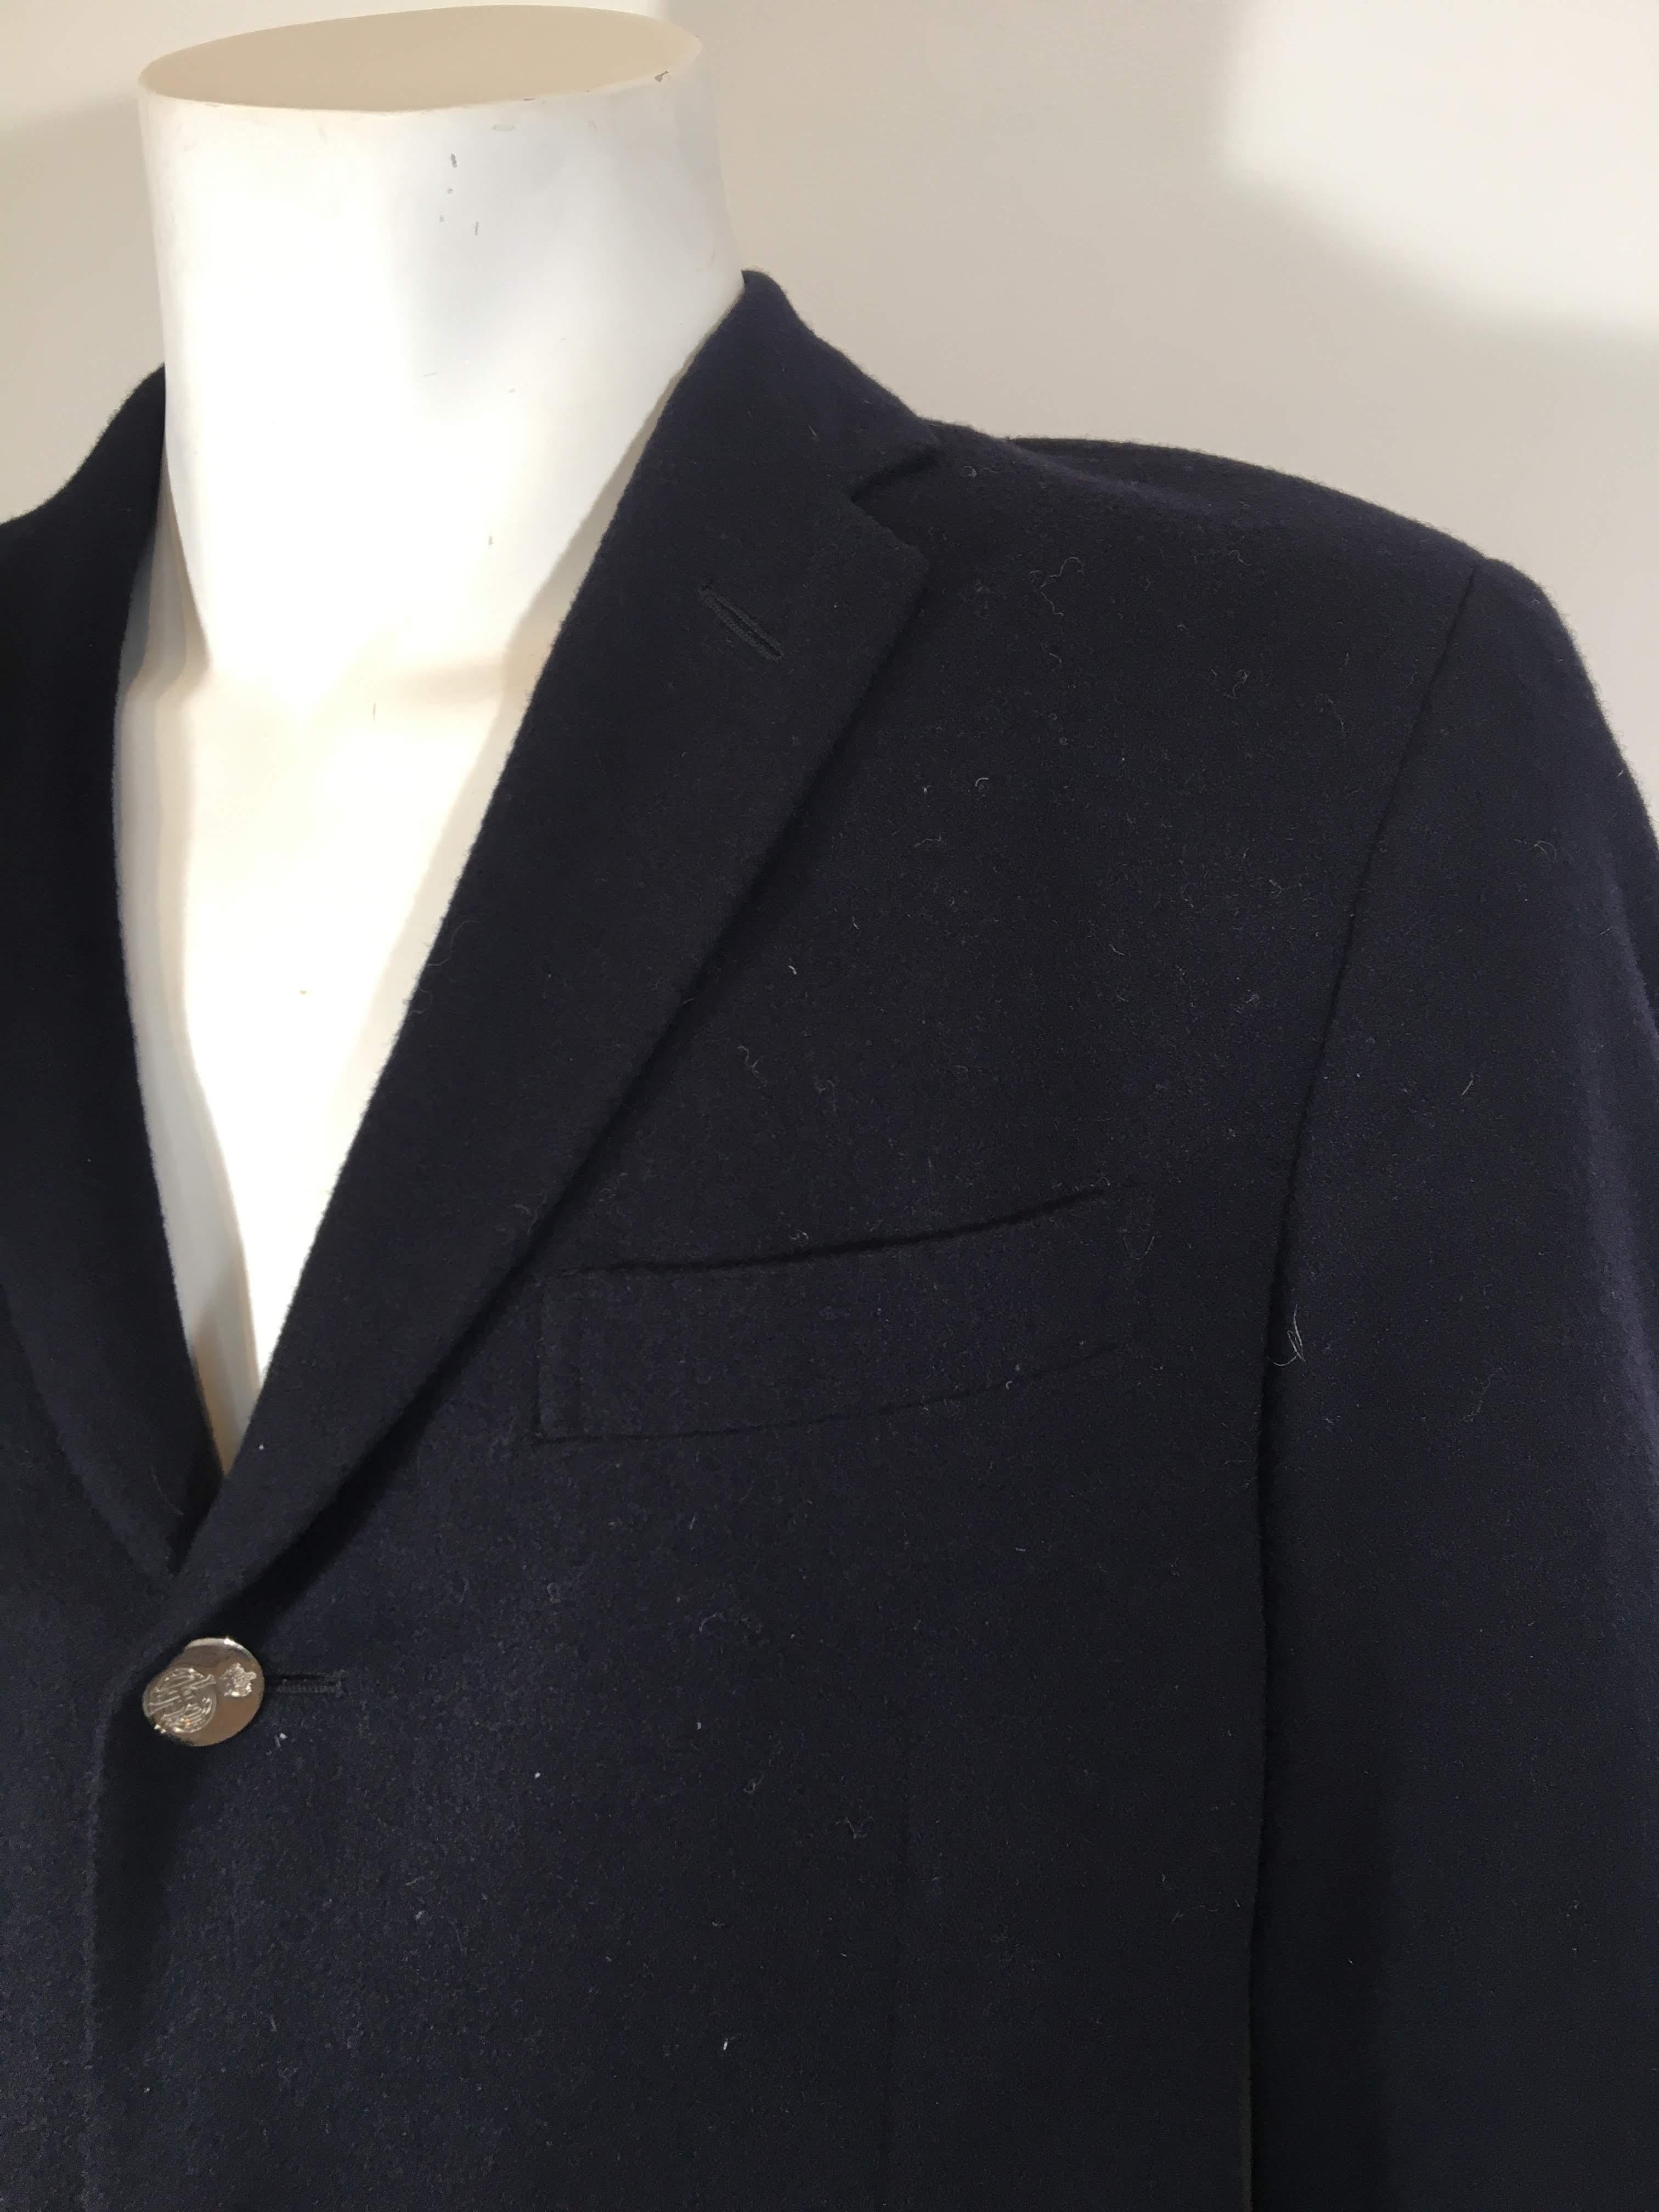 Men's Polo by Ralph Lauren navy cashmere blazer with   3 silver buttons.